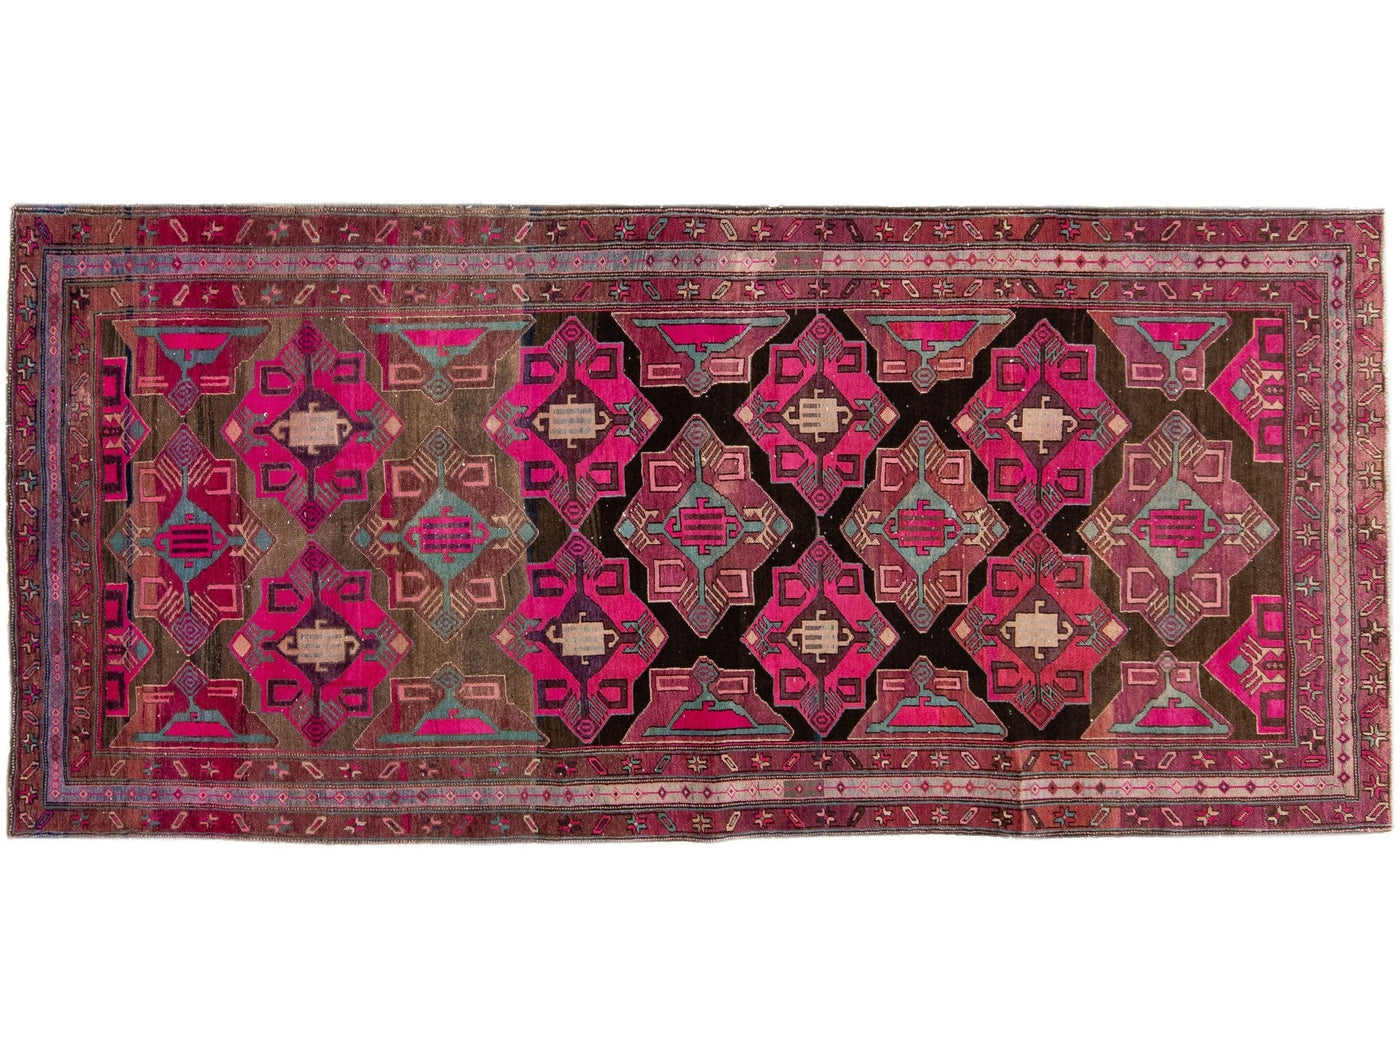 Vintage Persian Malayer Brown & Pink Handmade Wool Runner with Allover Design